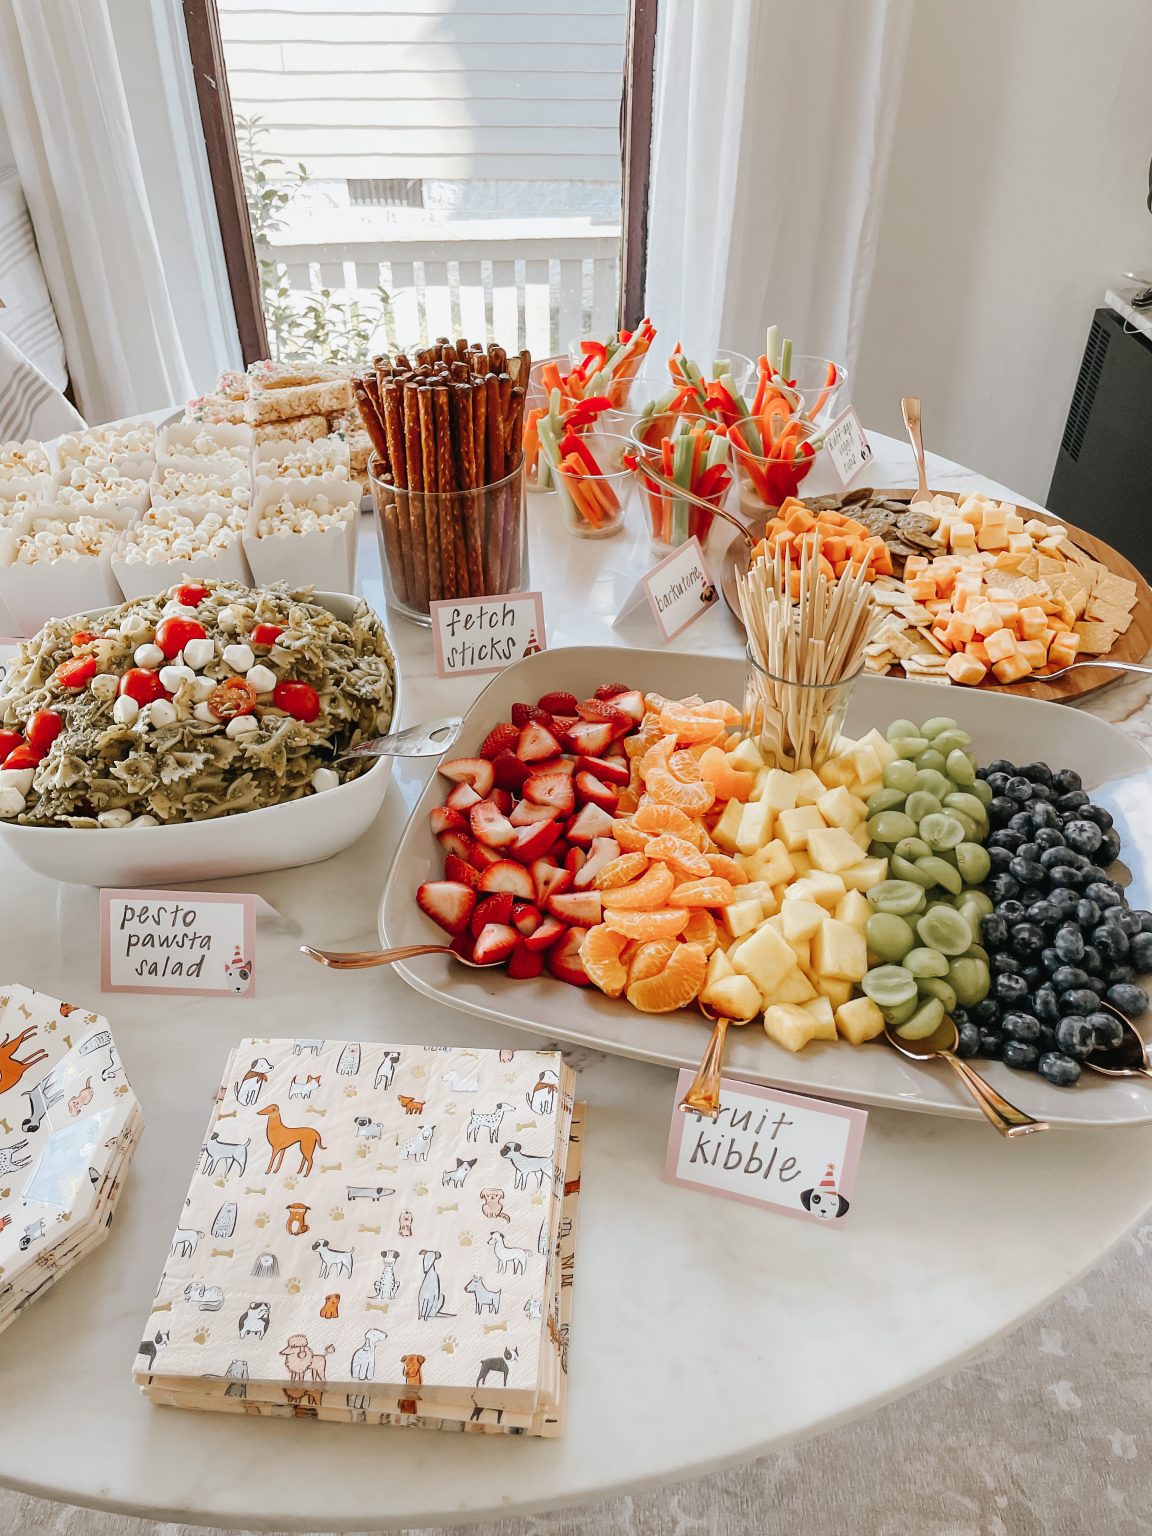 Foods on table related to puppy party theme including 'paw'sta salad, little cheese and veggie nibbles, pretzel sticks as fetch sticks. Photo credit to Lucky Andi.